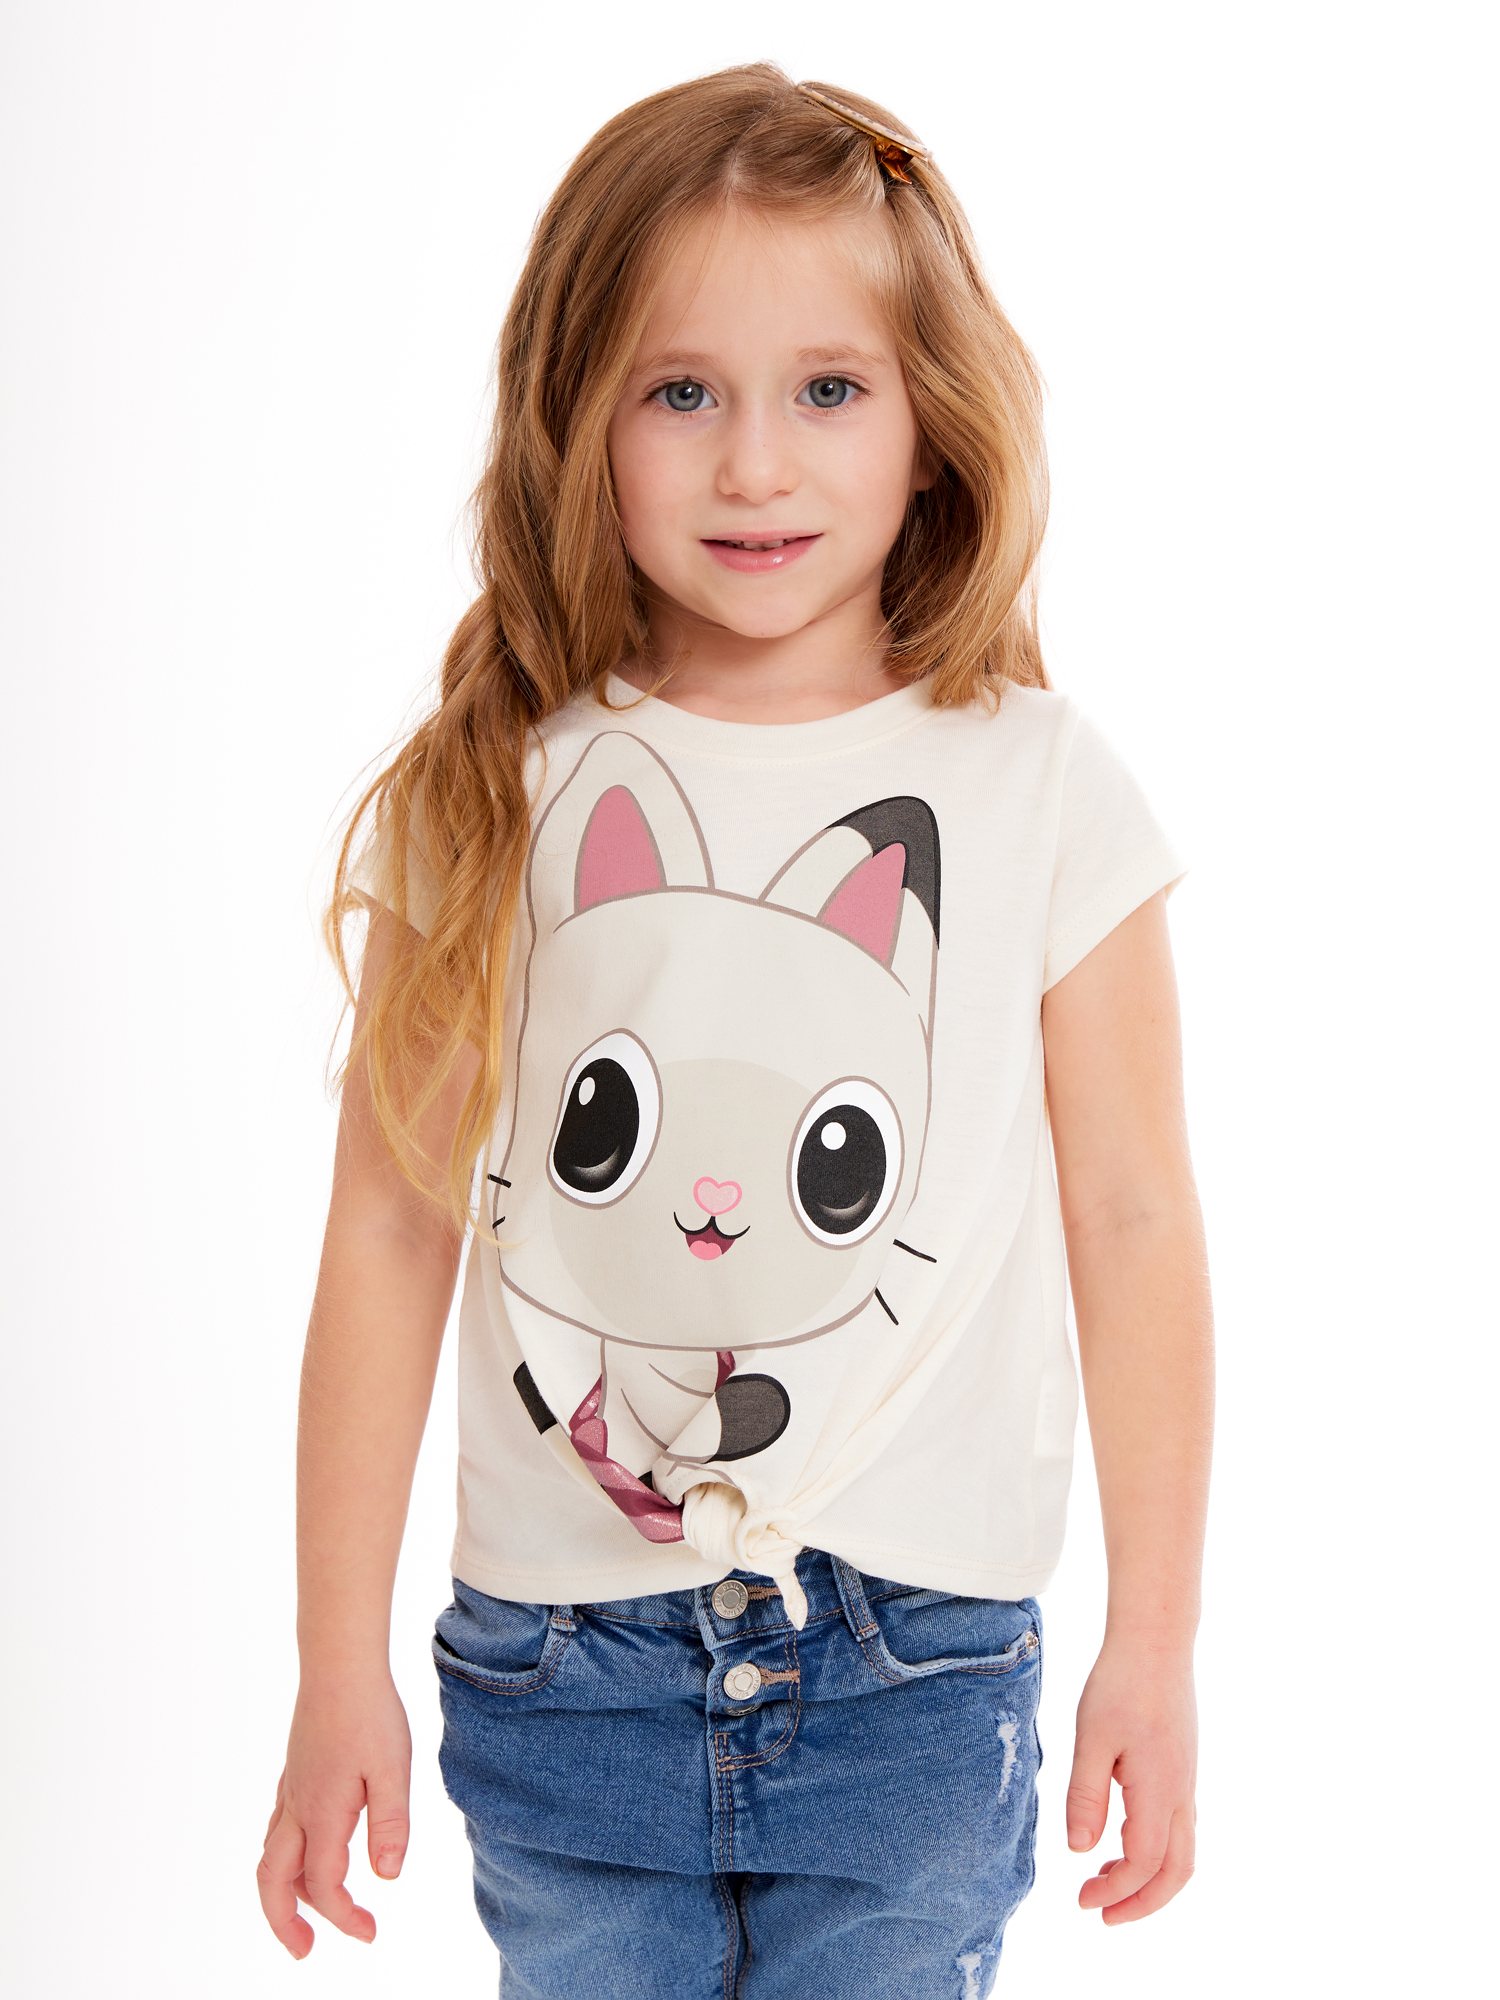 Gabby's Dollhouse Toddler Girl Graphic Print Fashion T-Shirts, 4-Pack, Sizes 2T-5T - image 5 of 9